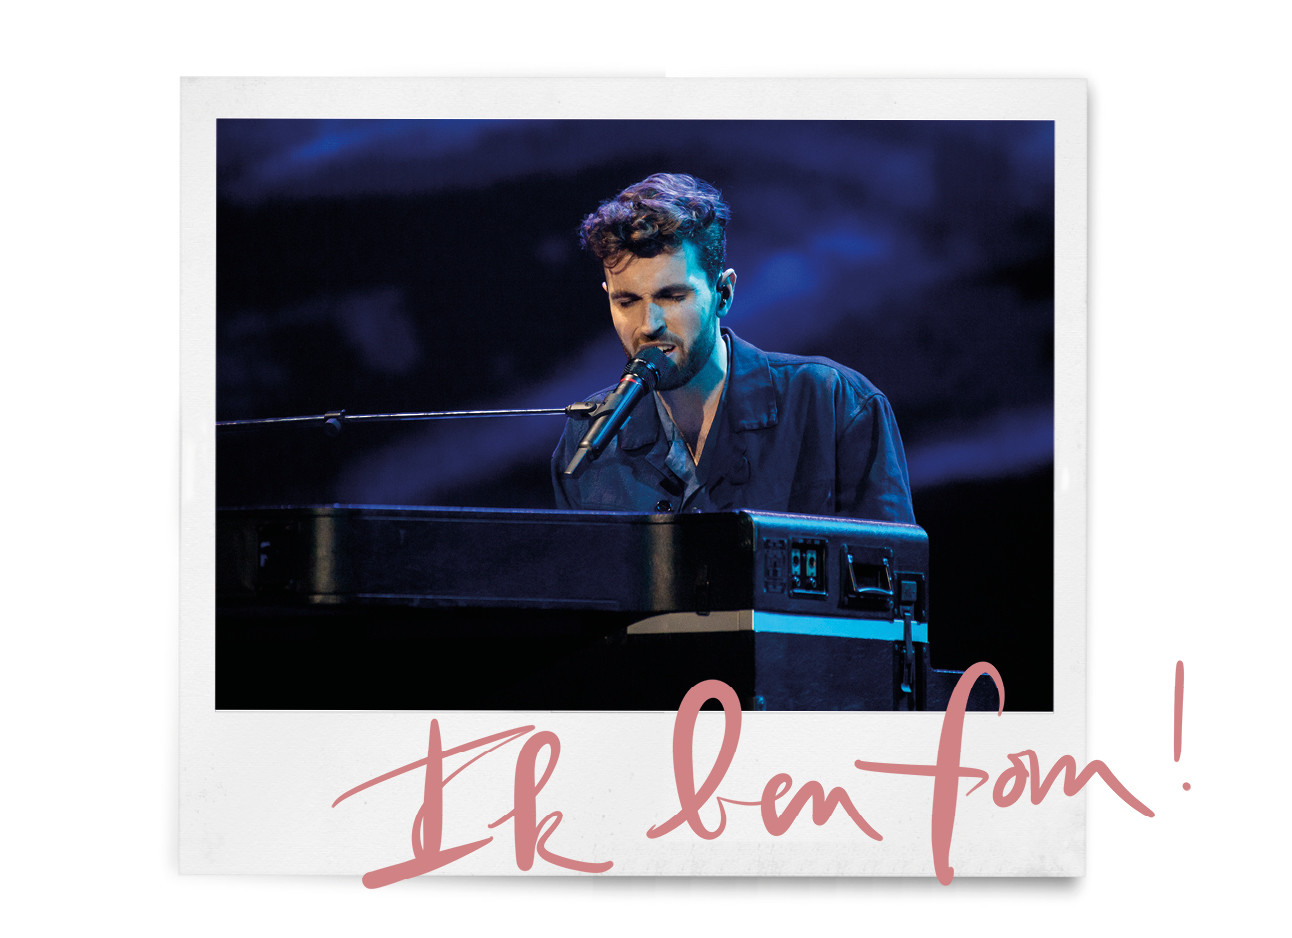 duncan laurence performing live during eurovision songcontest in tel aviv